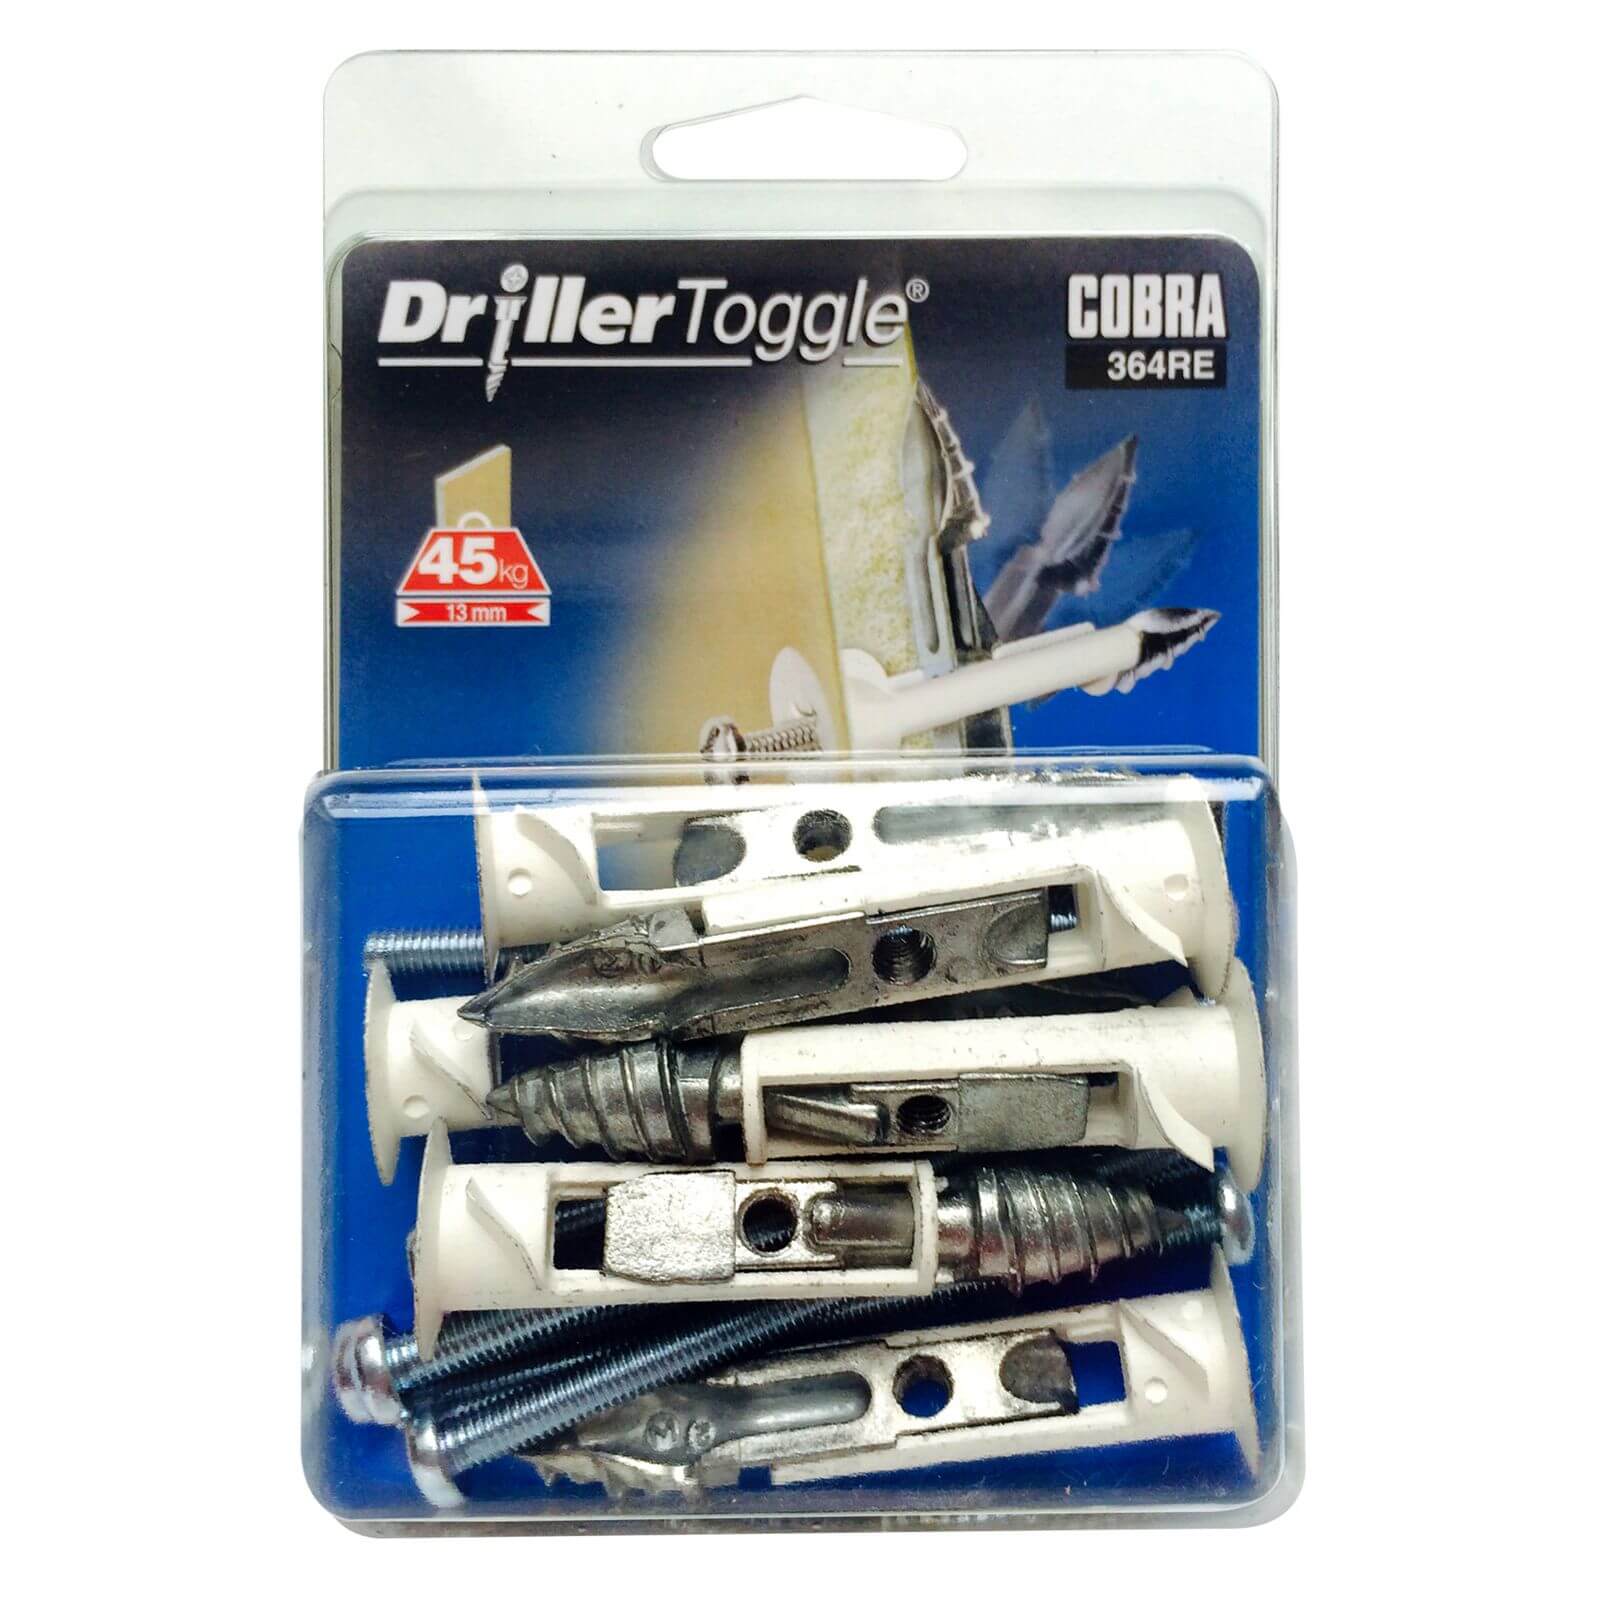 Cobra Driller Toggle - Hollow Wall Fixings x 6 - 364RE